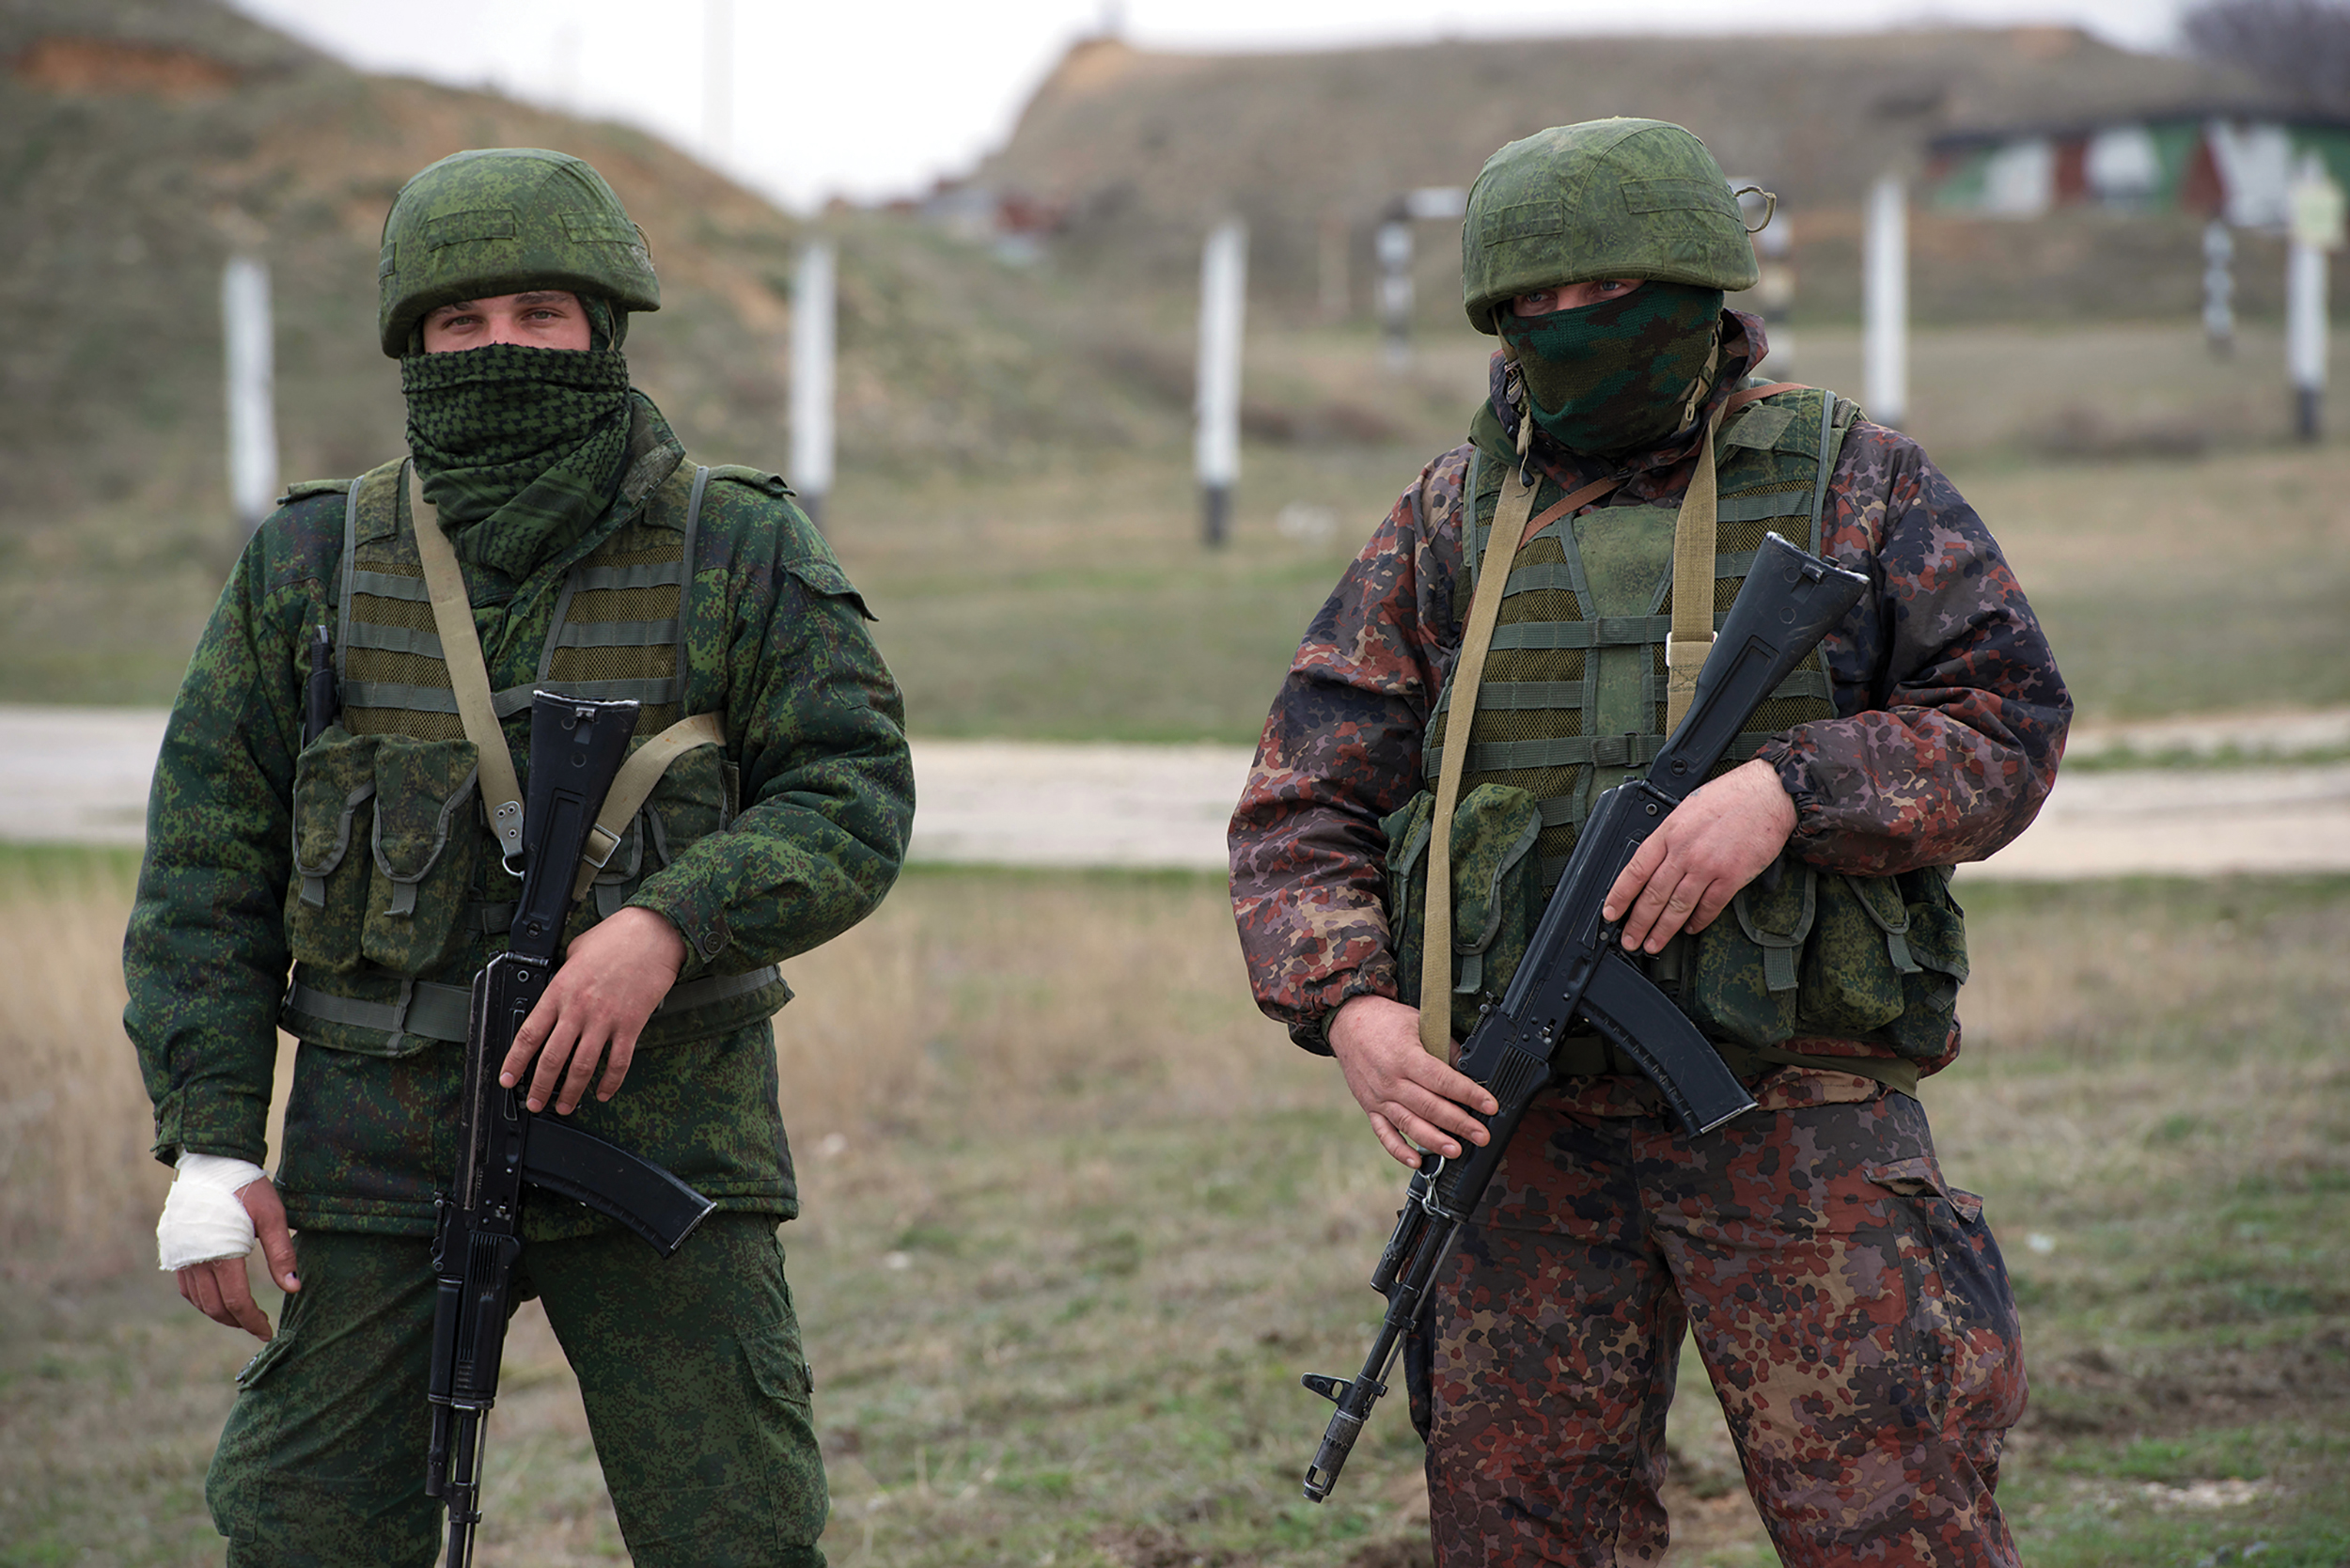 Russian soldiers with no insignia, at Belbek Airfield, as part of Russia’s annexation of Crimea, in 2014